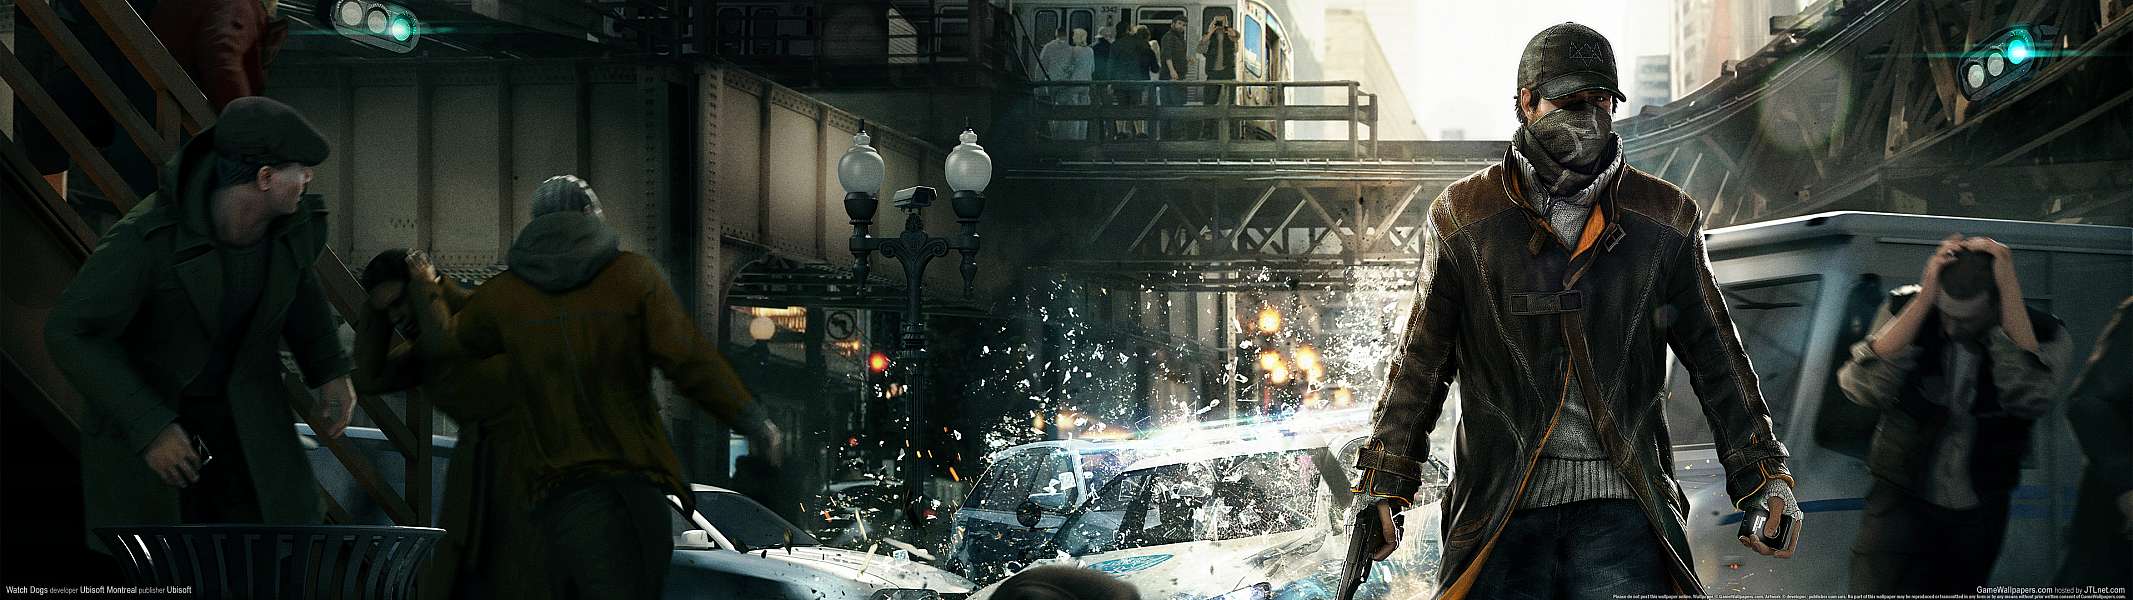 Watch Dogs dual screen achtergrond